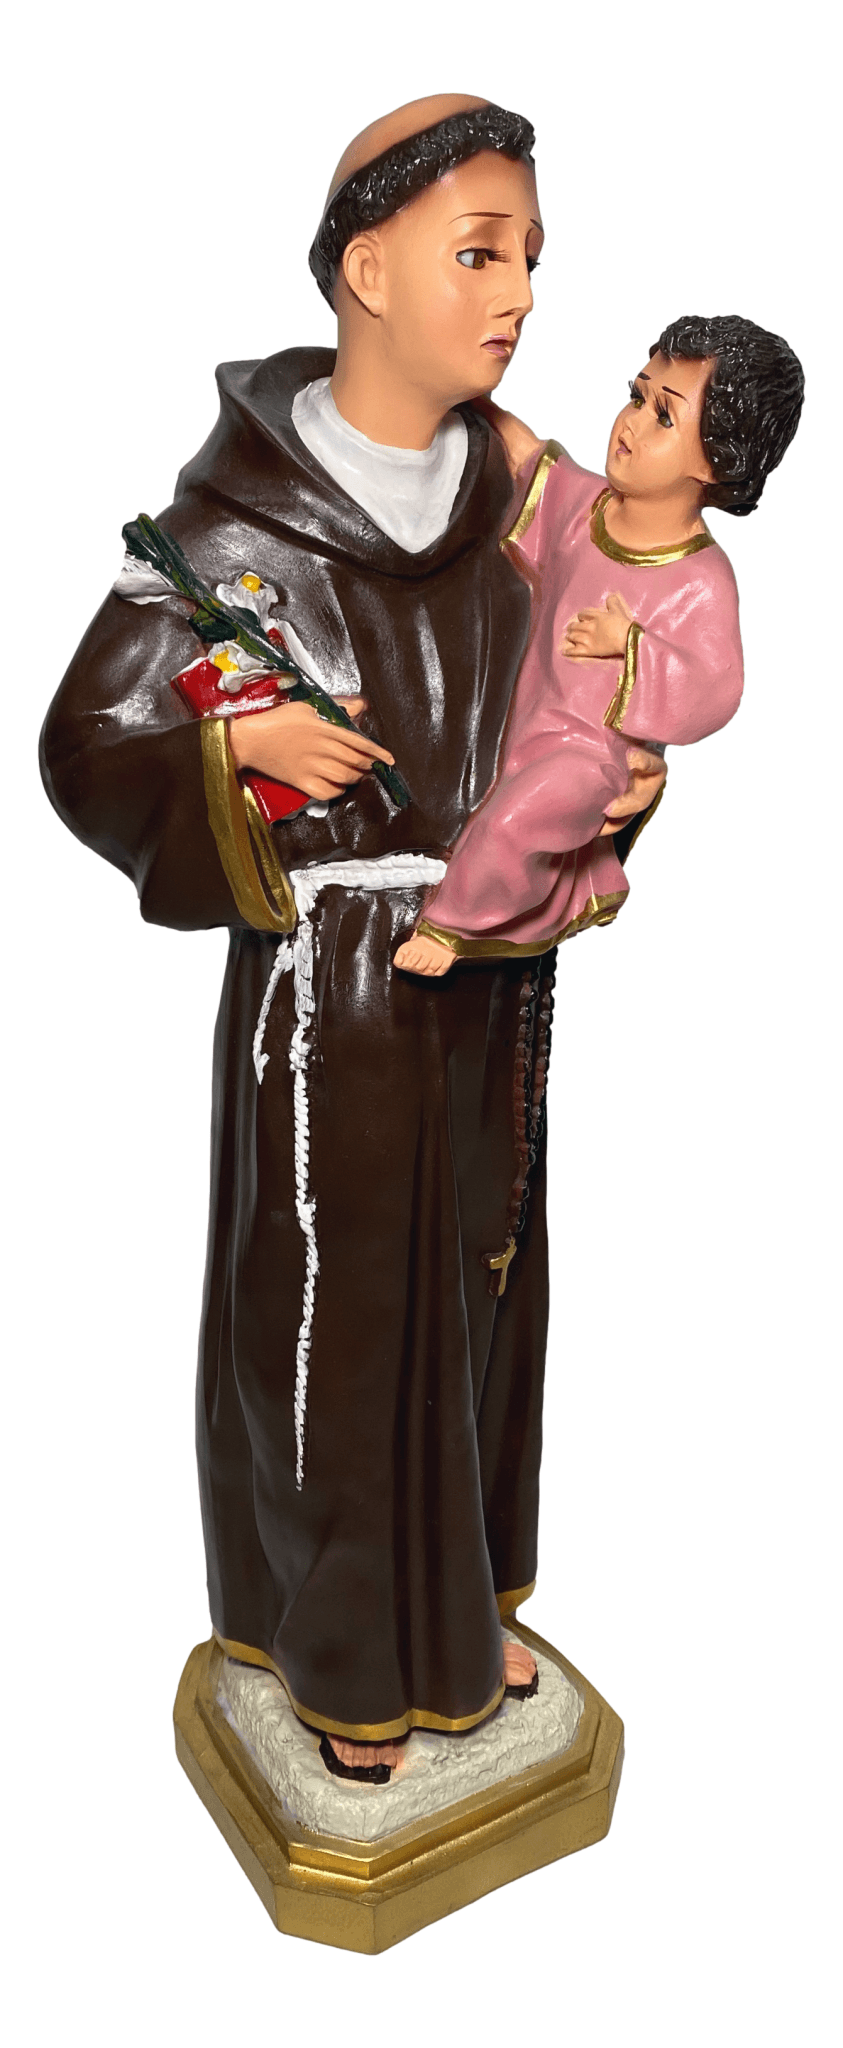 Statue Large Saint Anthony Book and Child 4 3/4 L x 4 3/4 W x 19 H inches - Ysleta Mission Gift Shop- VOTED El Paso's Best Gift Shop